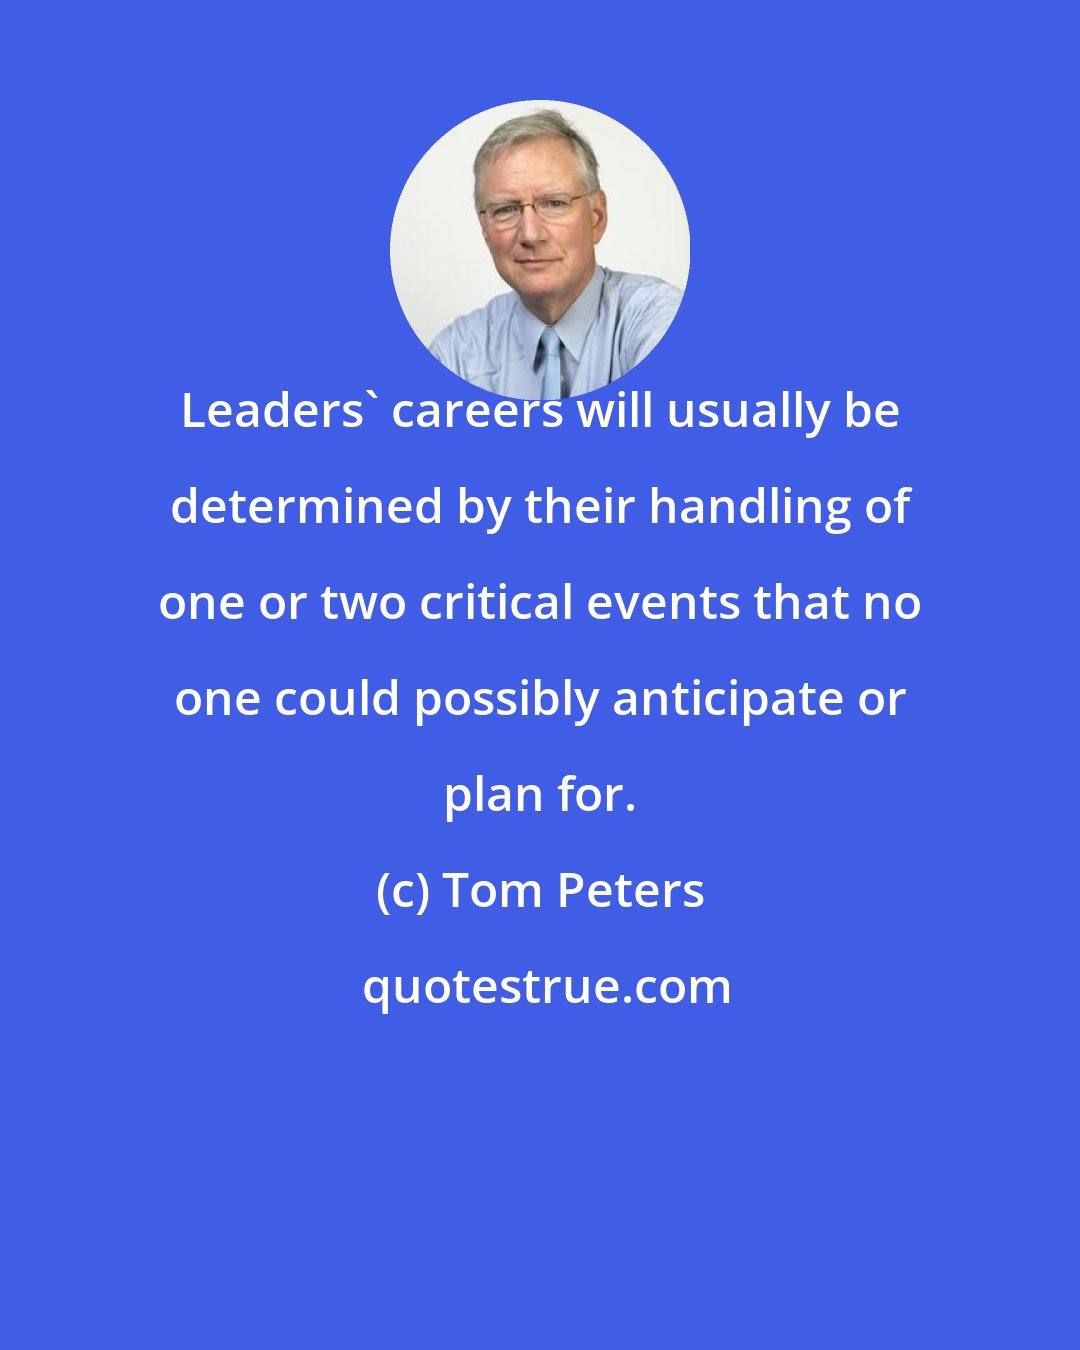 Tom Peters: Leaders' careers will usually be determined by their handling of one or two critical events that no one could possibly anticipate or plan for.